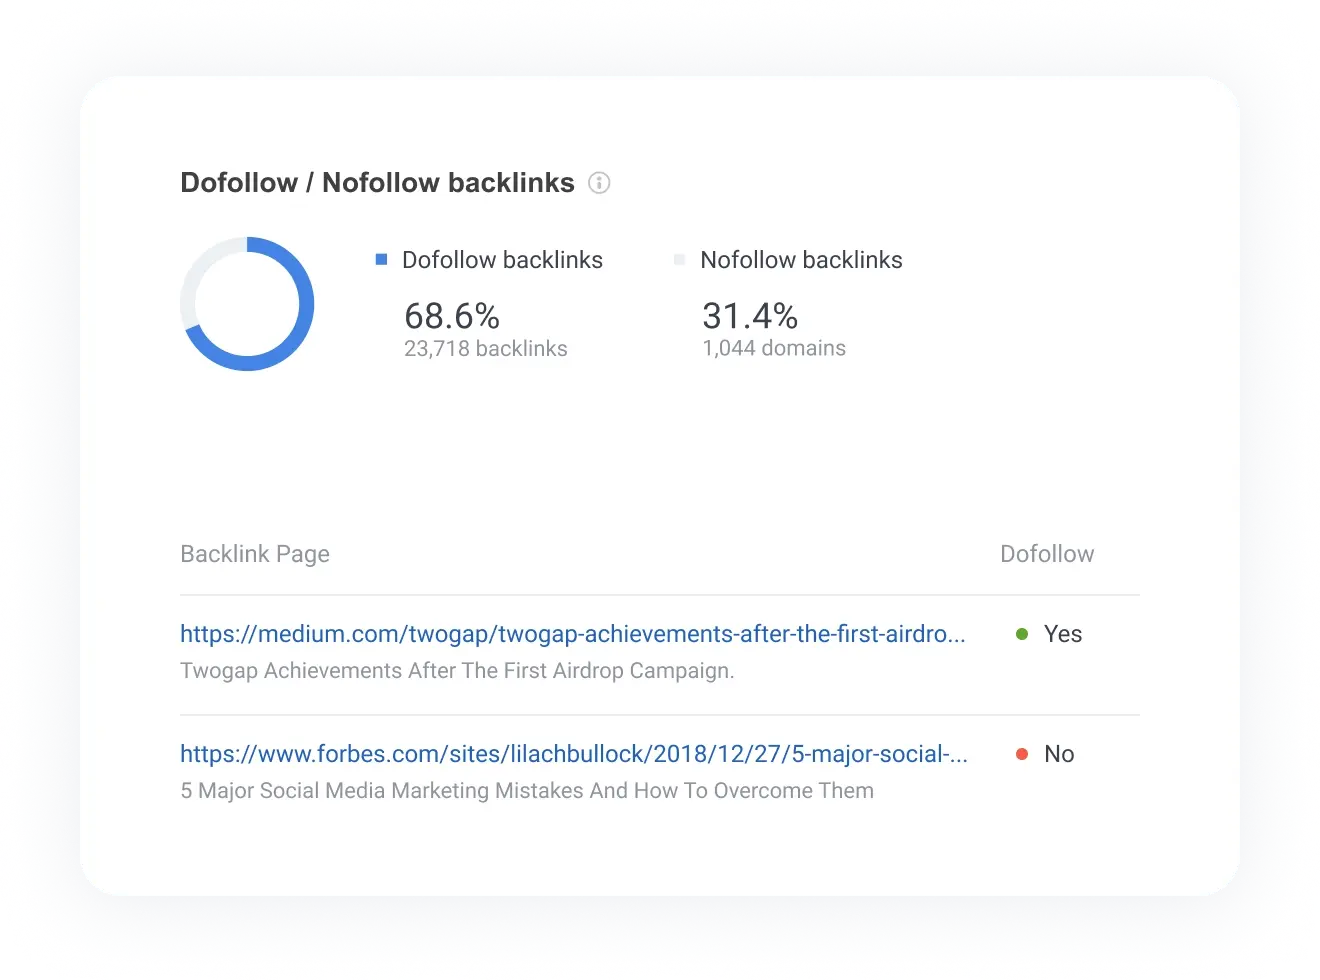 See the chart of dofollow and nofollow backlink distribution